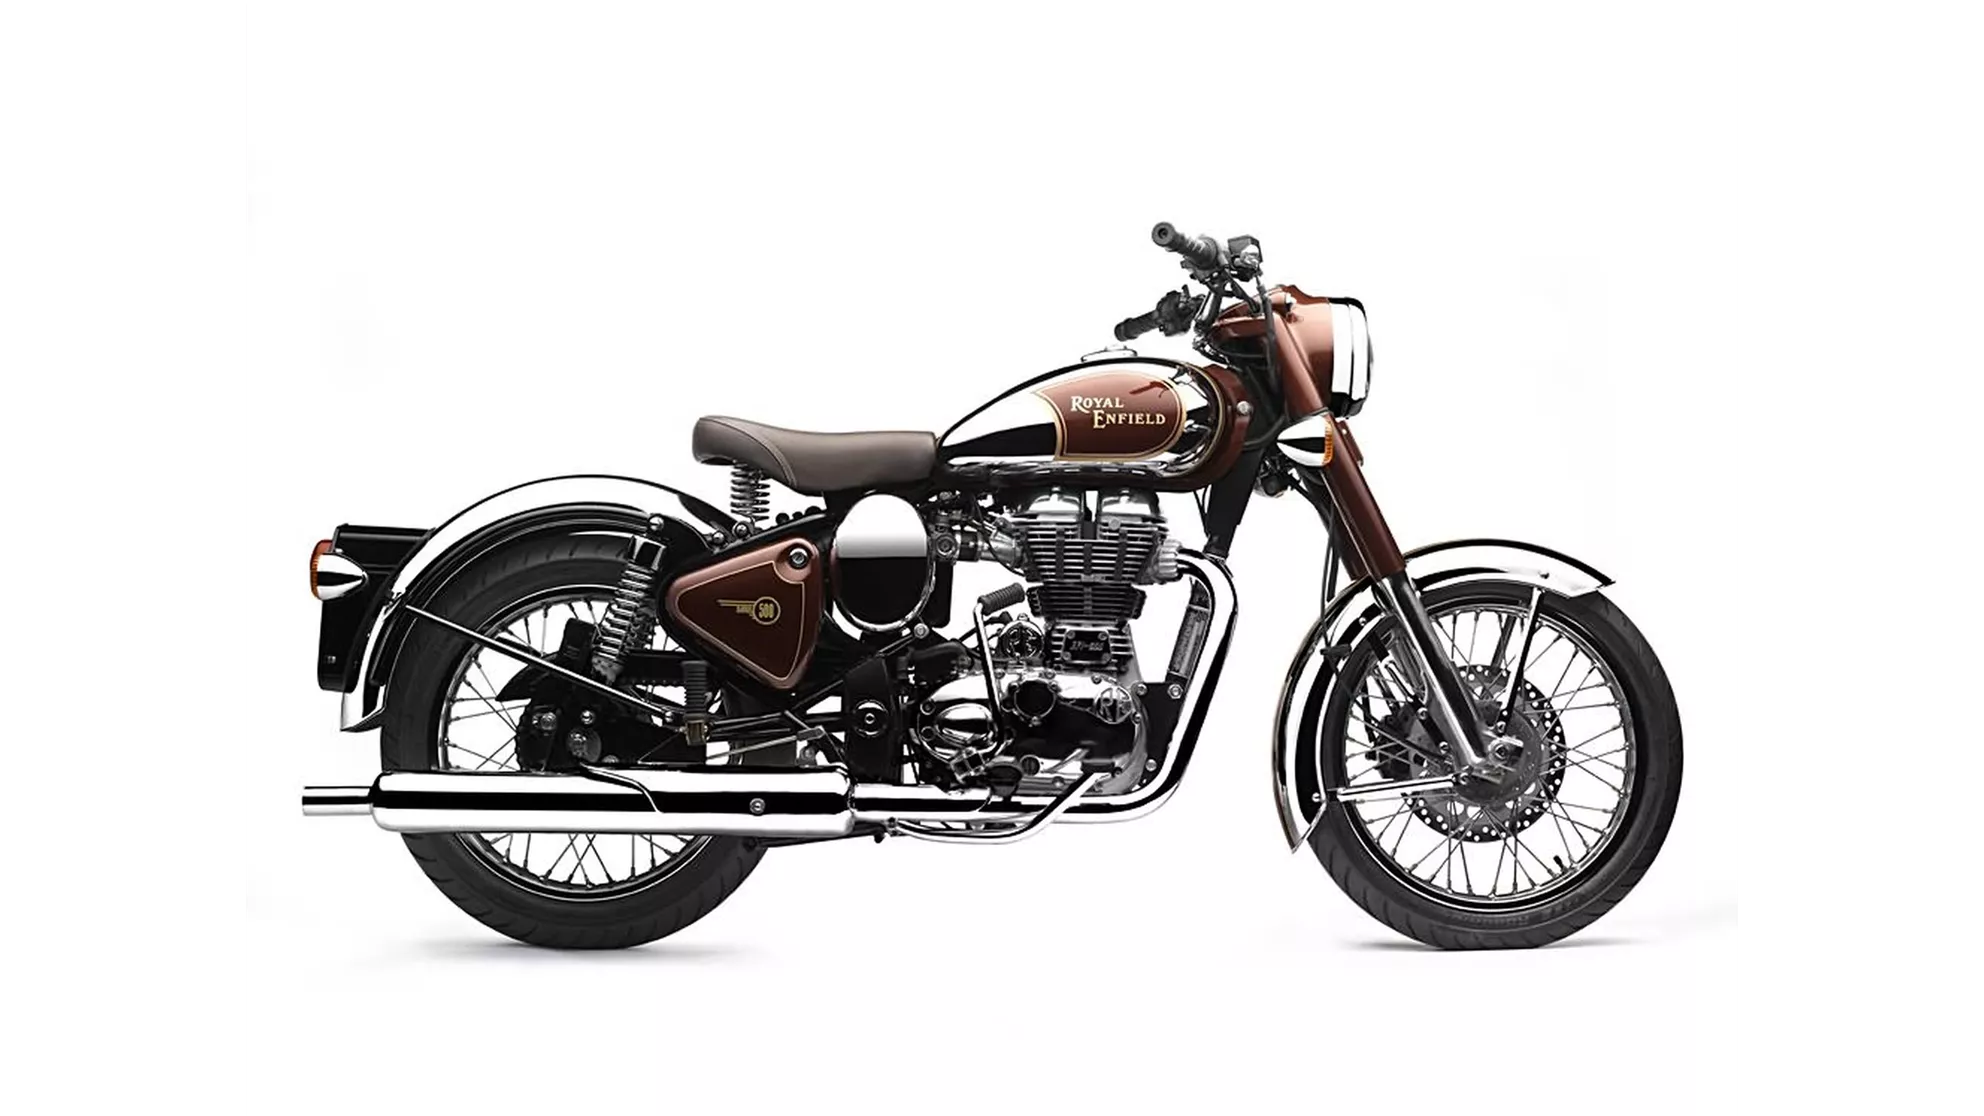 Royal Enfield Bullet 500 Classic Chrome - Image 6